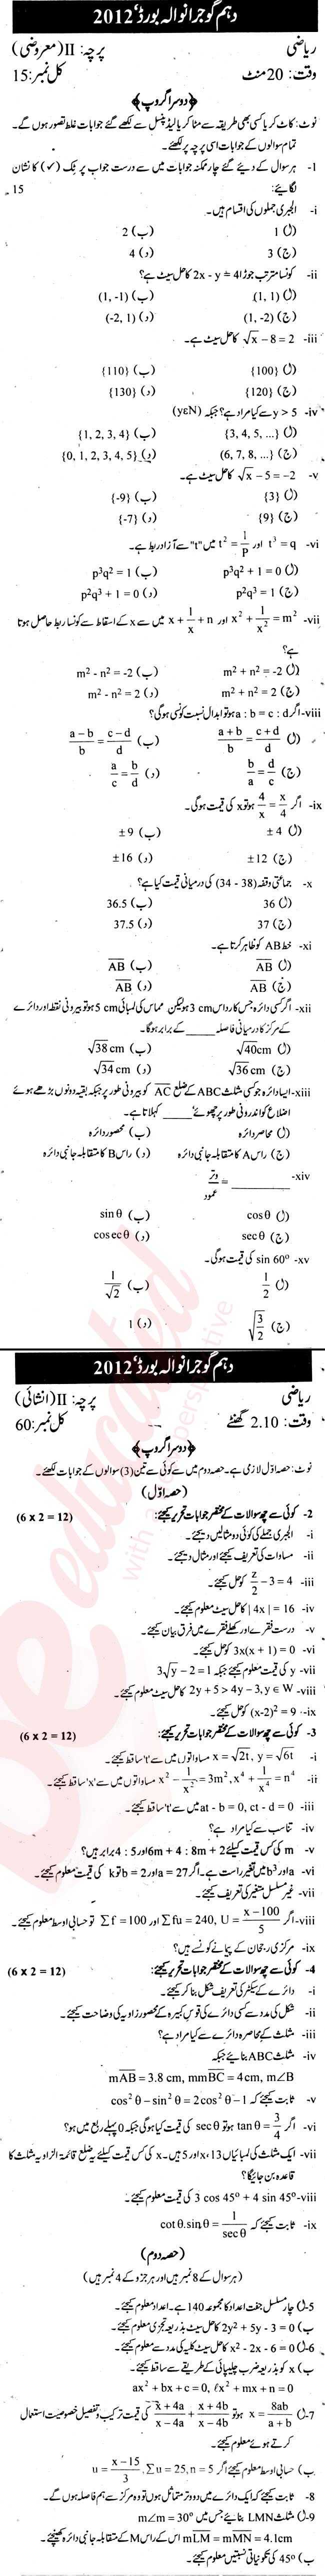 Math 10th class Past Paper Group 2 BISE Gujranwala 2012